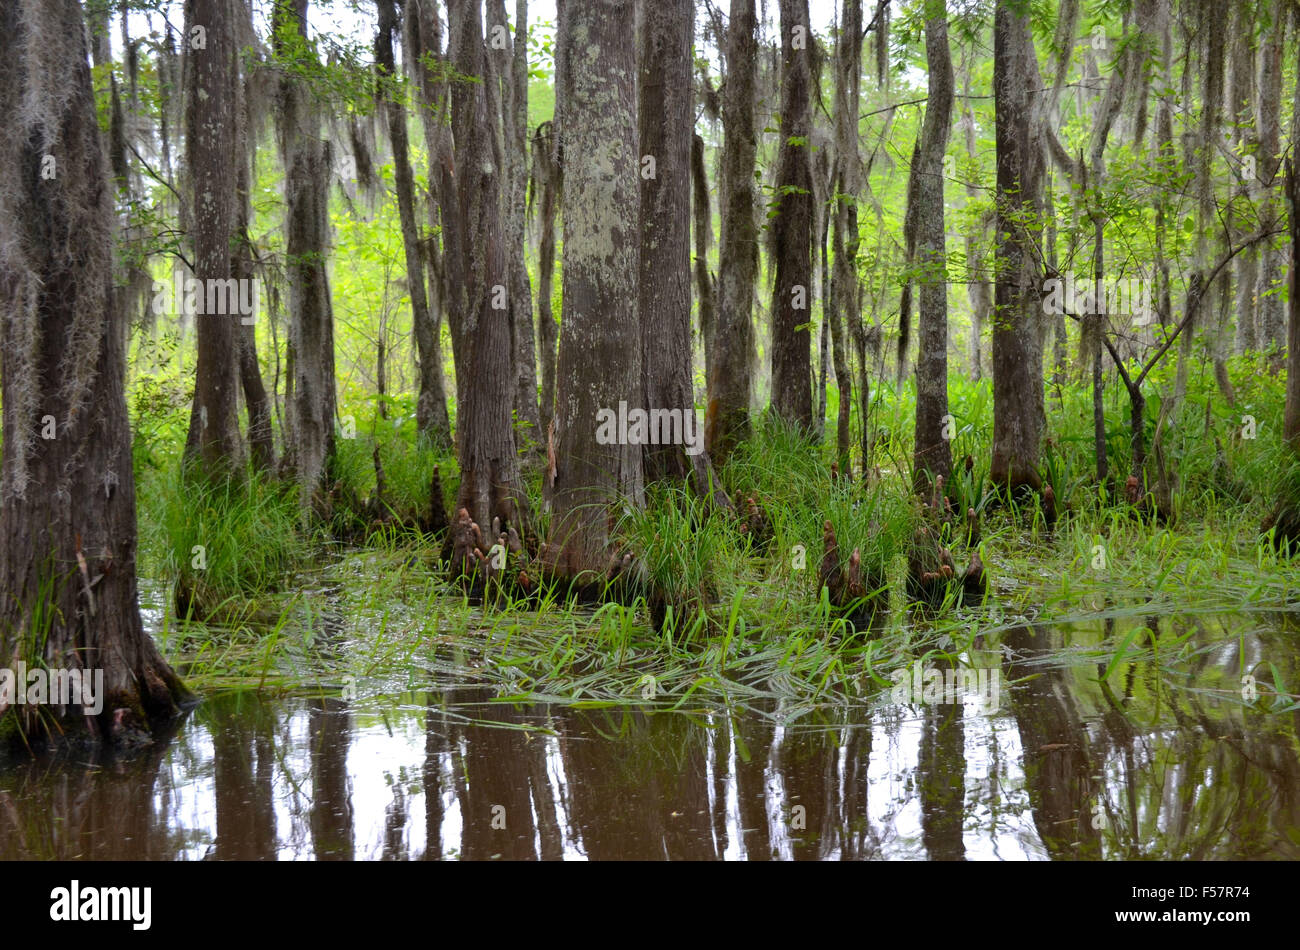 Spanish moss hanging from cypress trees in a Louisiana bayou swamp. Stock Photo